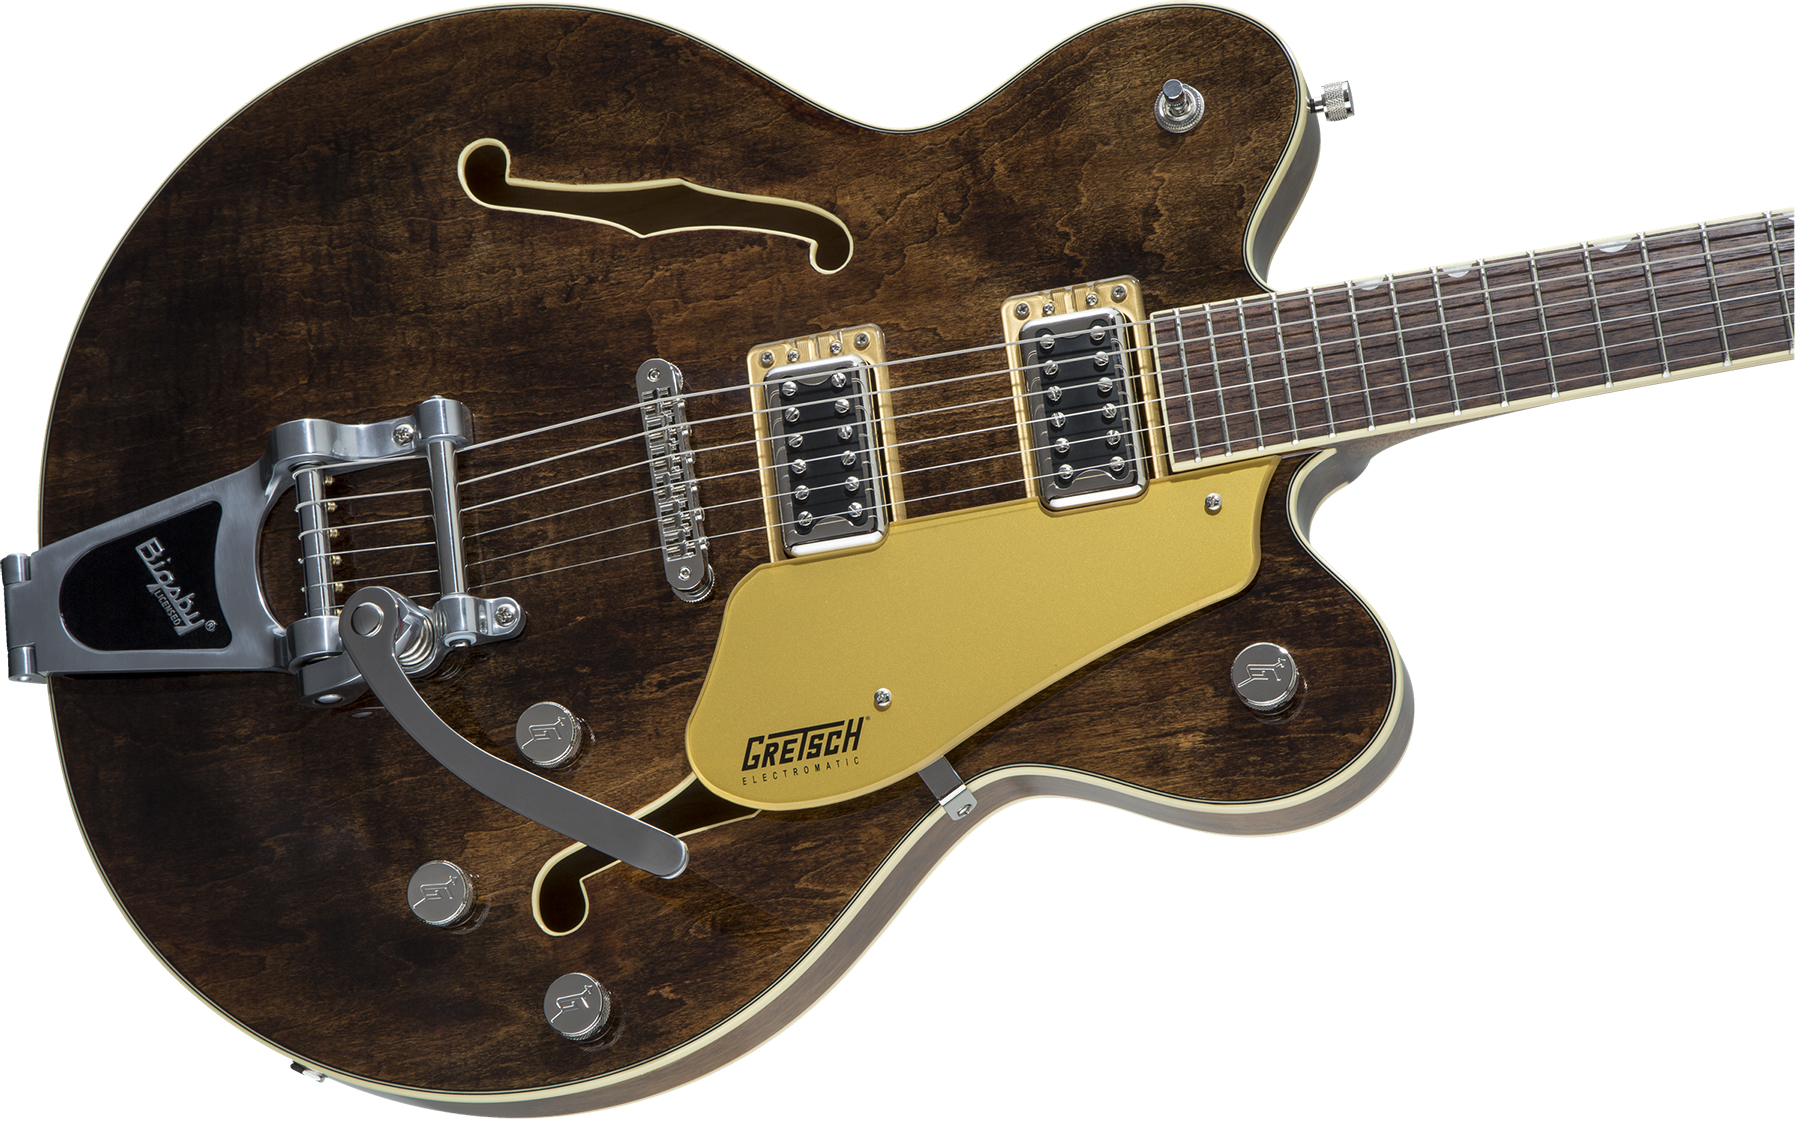 Gretsch G5622t Center Bloc Double Cut Bigsby Electromatic 2019 Hh Lau - Imperial Stain - Semi-Hollow E-Gitarre - Variation 2